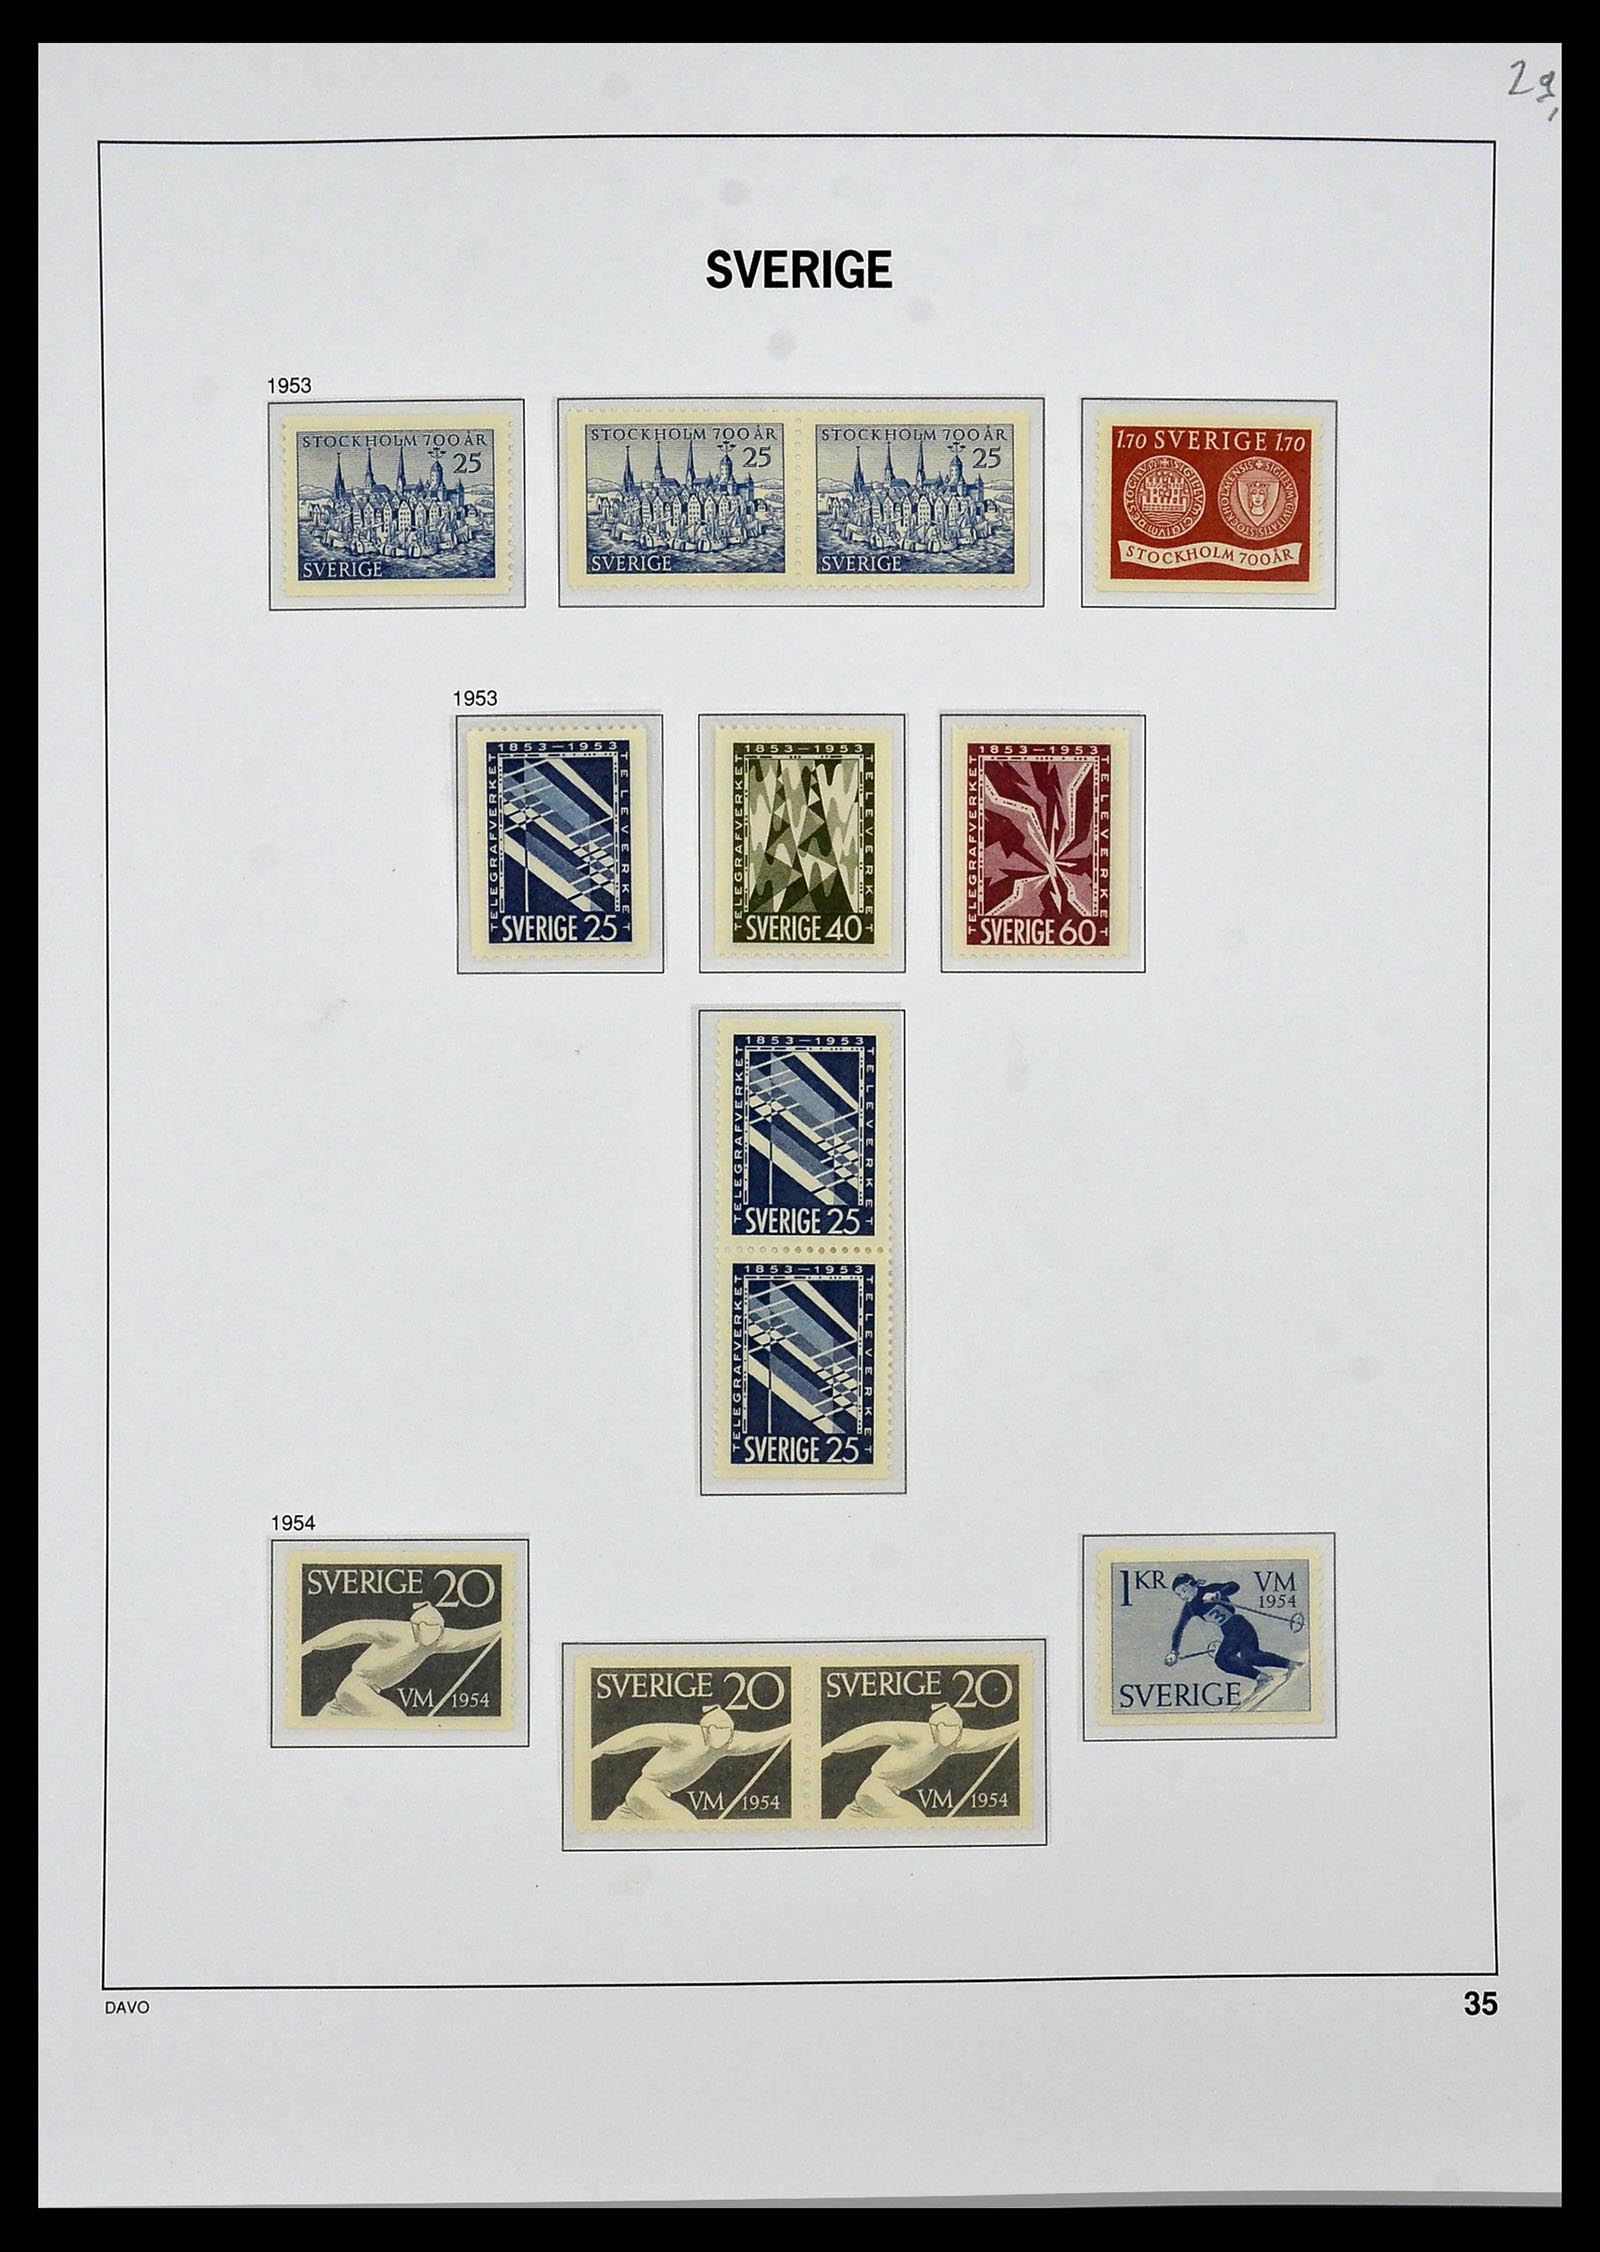 34292 032 - Stamp collection 34292 Sweden 1891-2015!